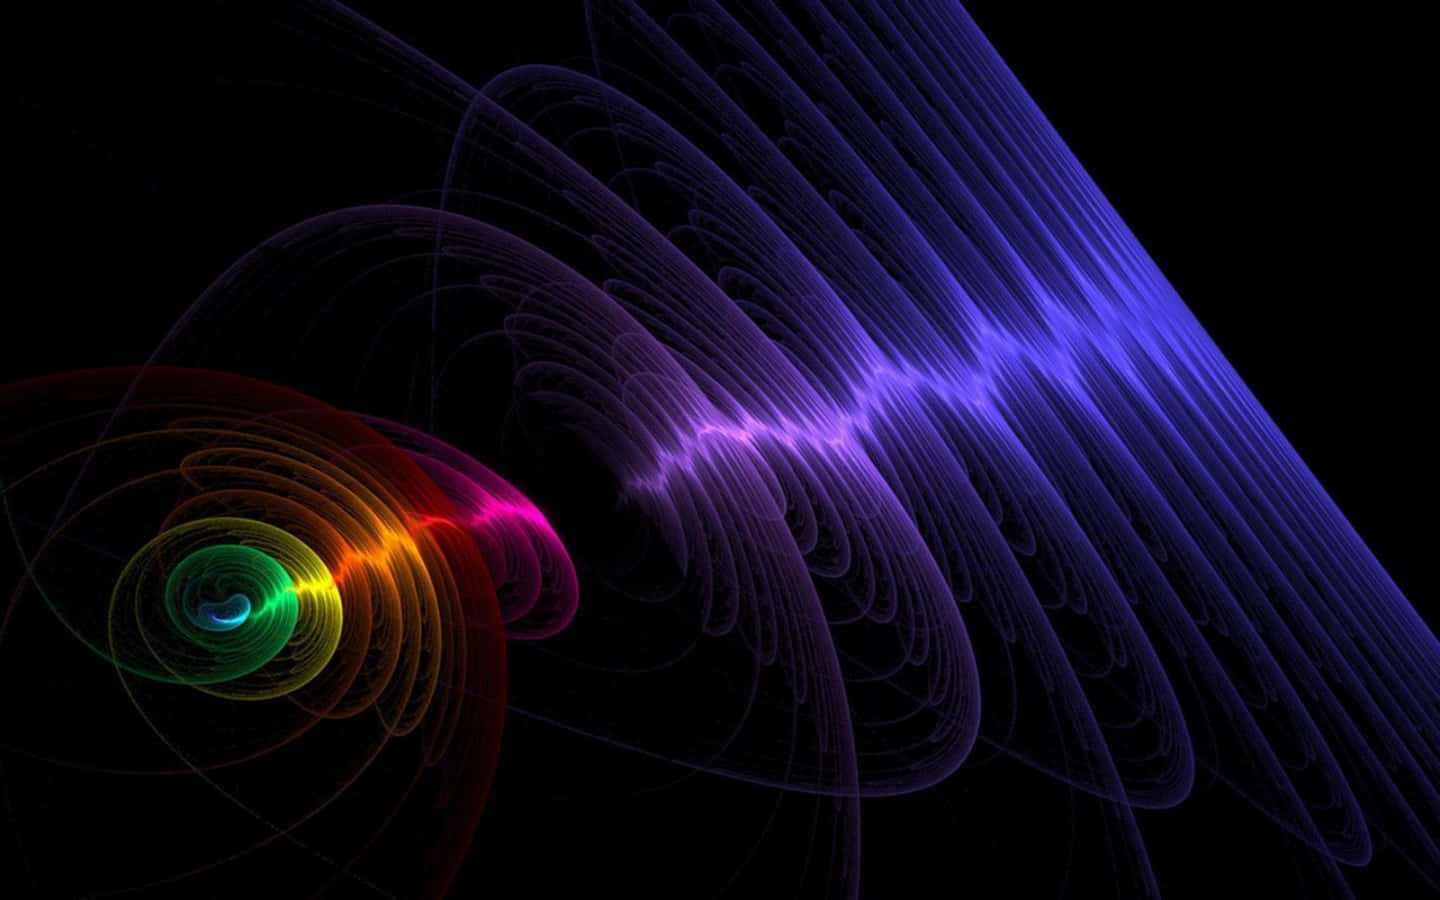 A Colorful Abstract Image Of A Spiral Background